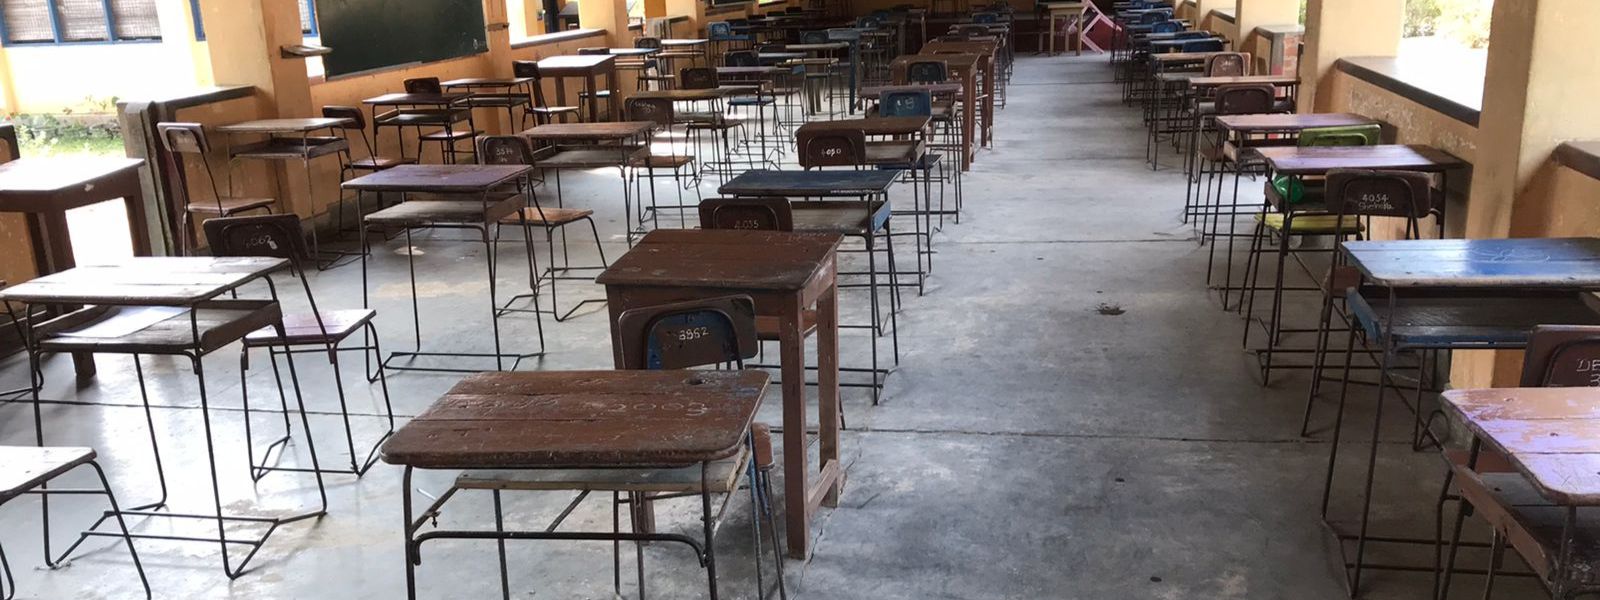 Third school term for 2022 ends today (24)